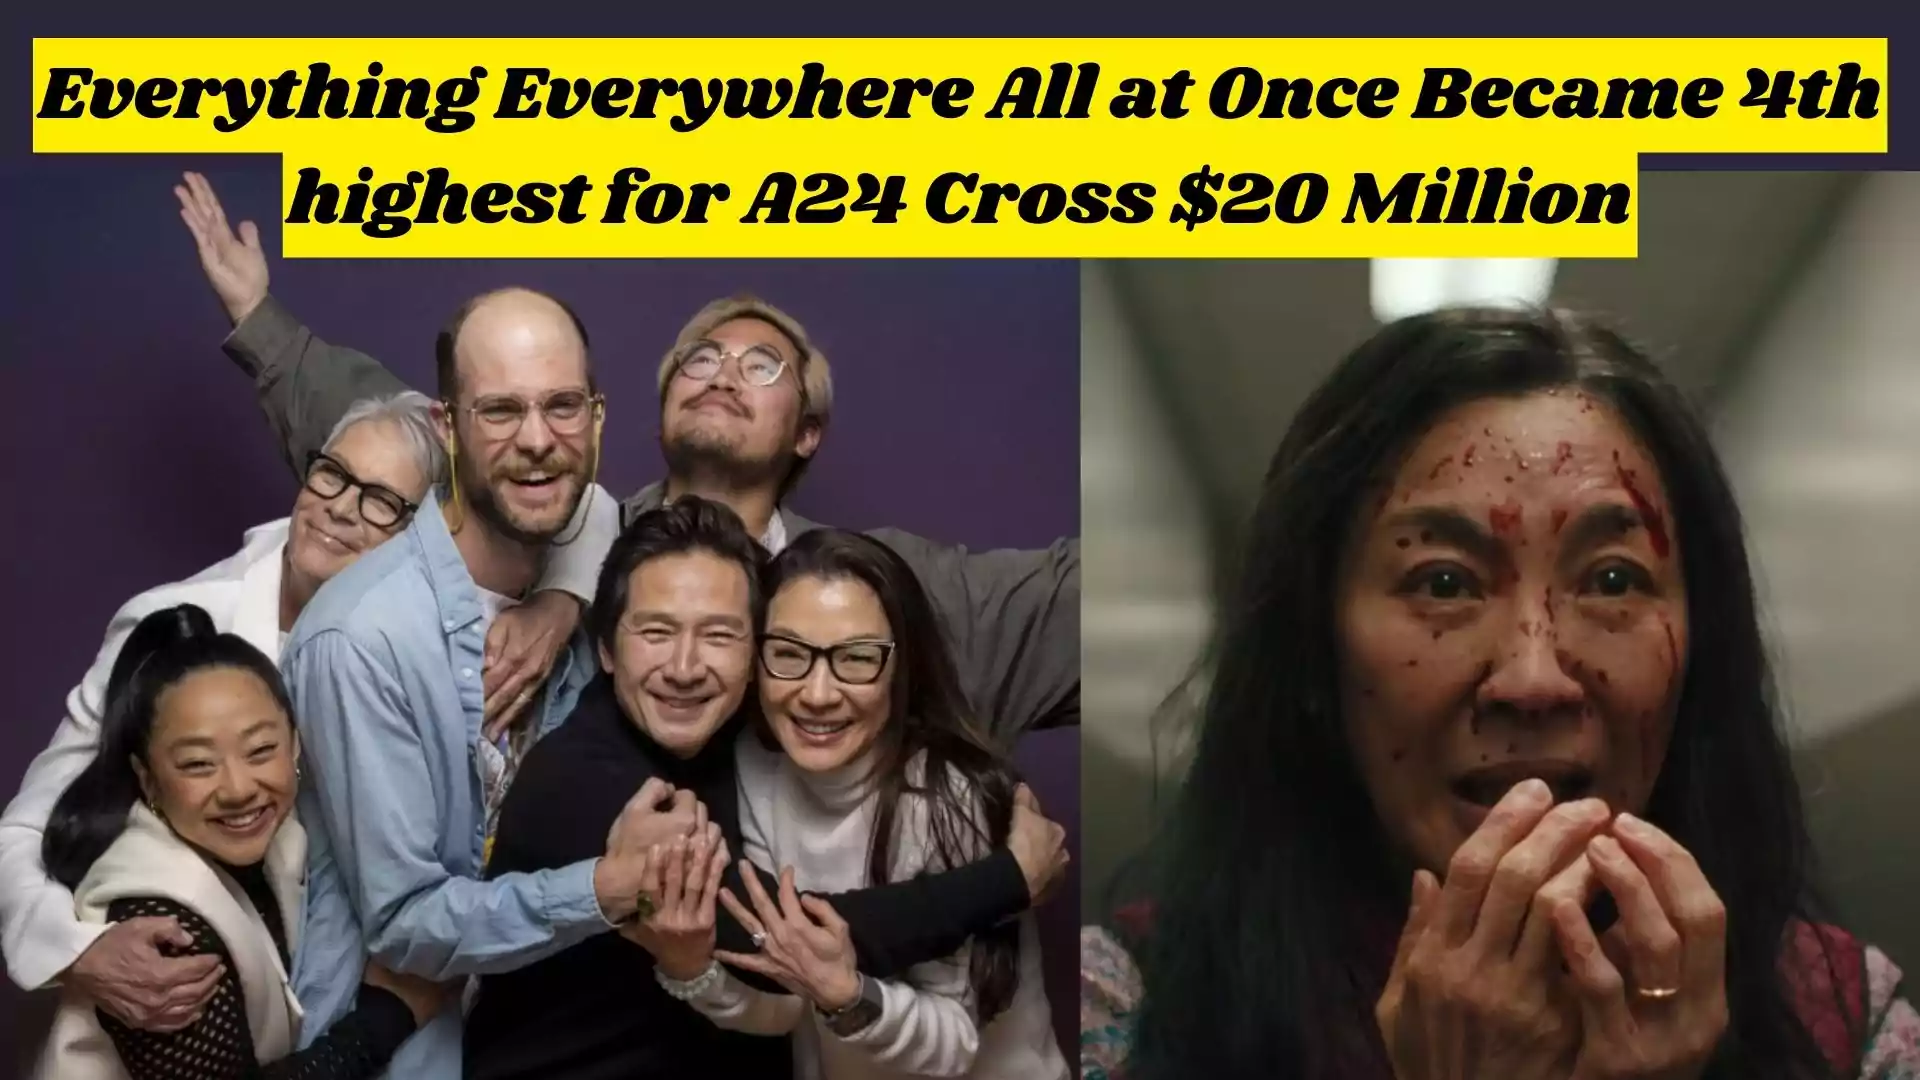 Everything Everywhere All at Once Became 4th highest for A24 Cross $20 Million wallpaper and images